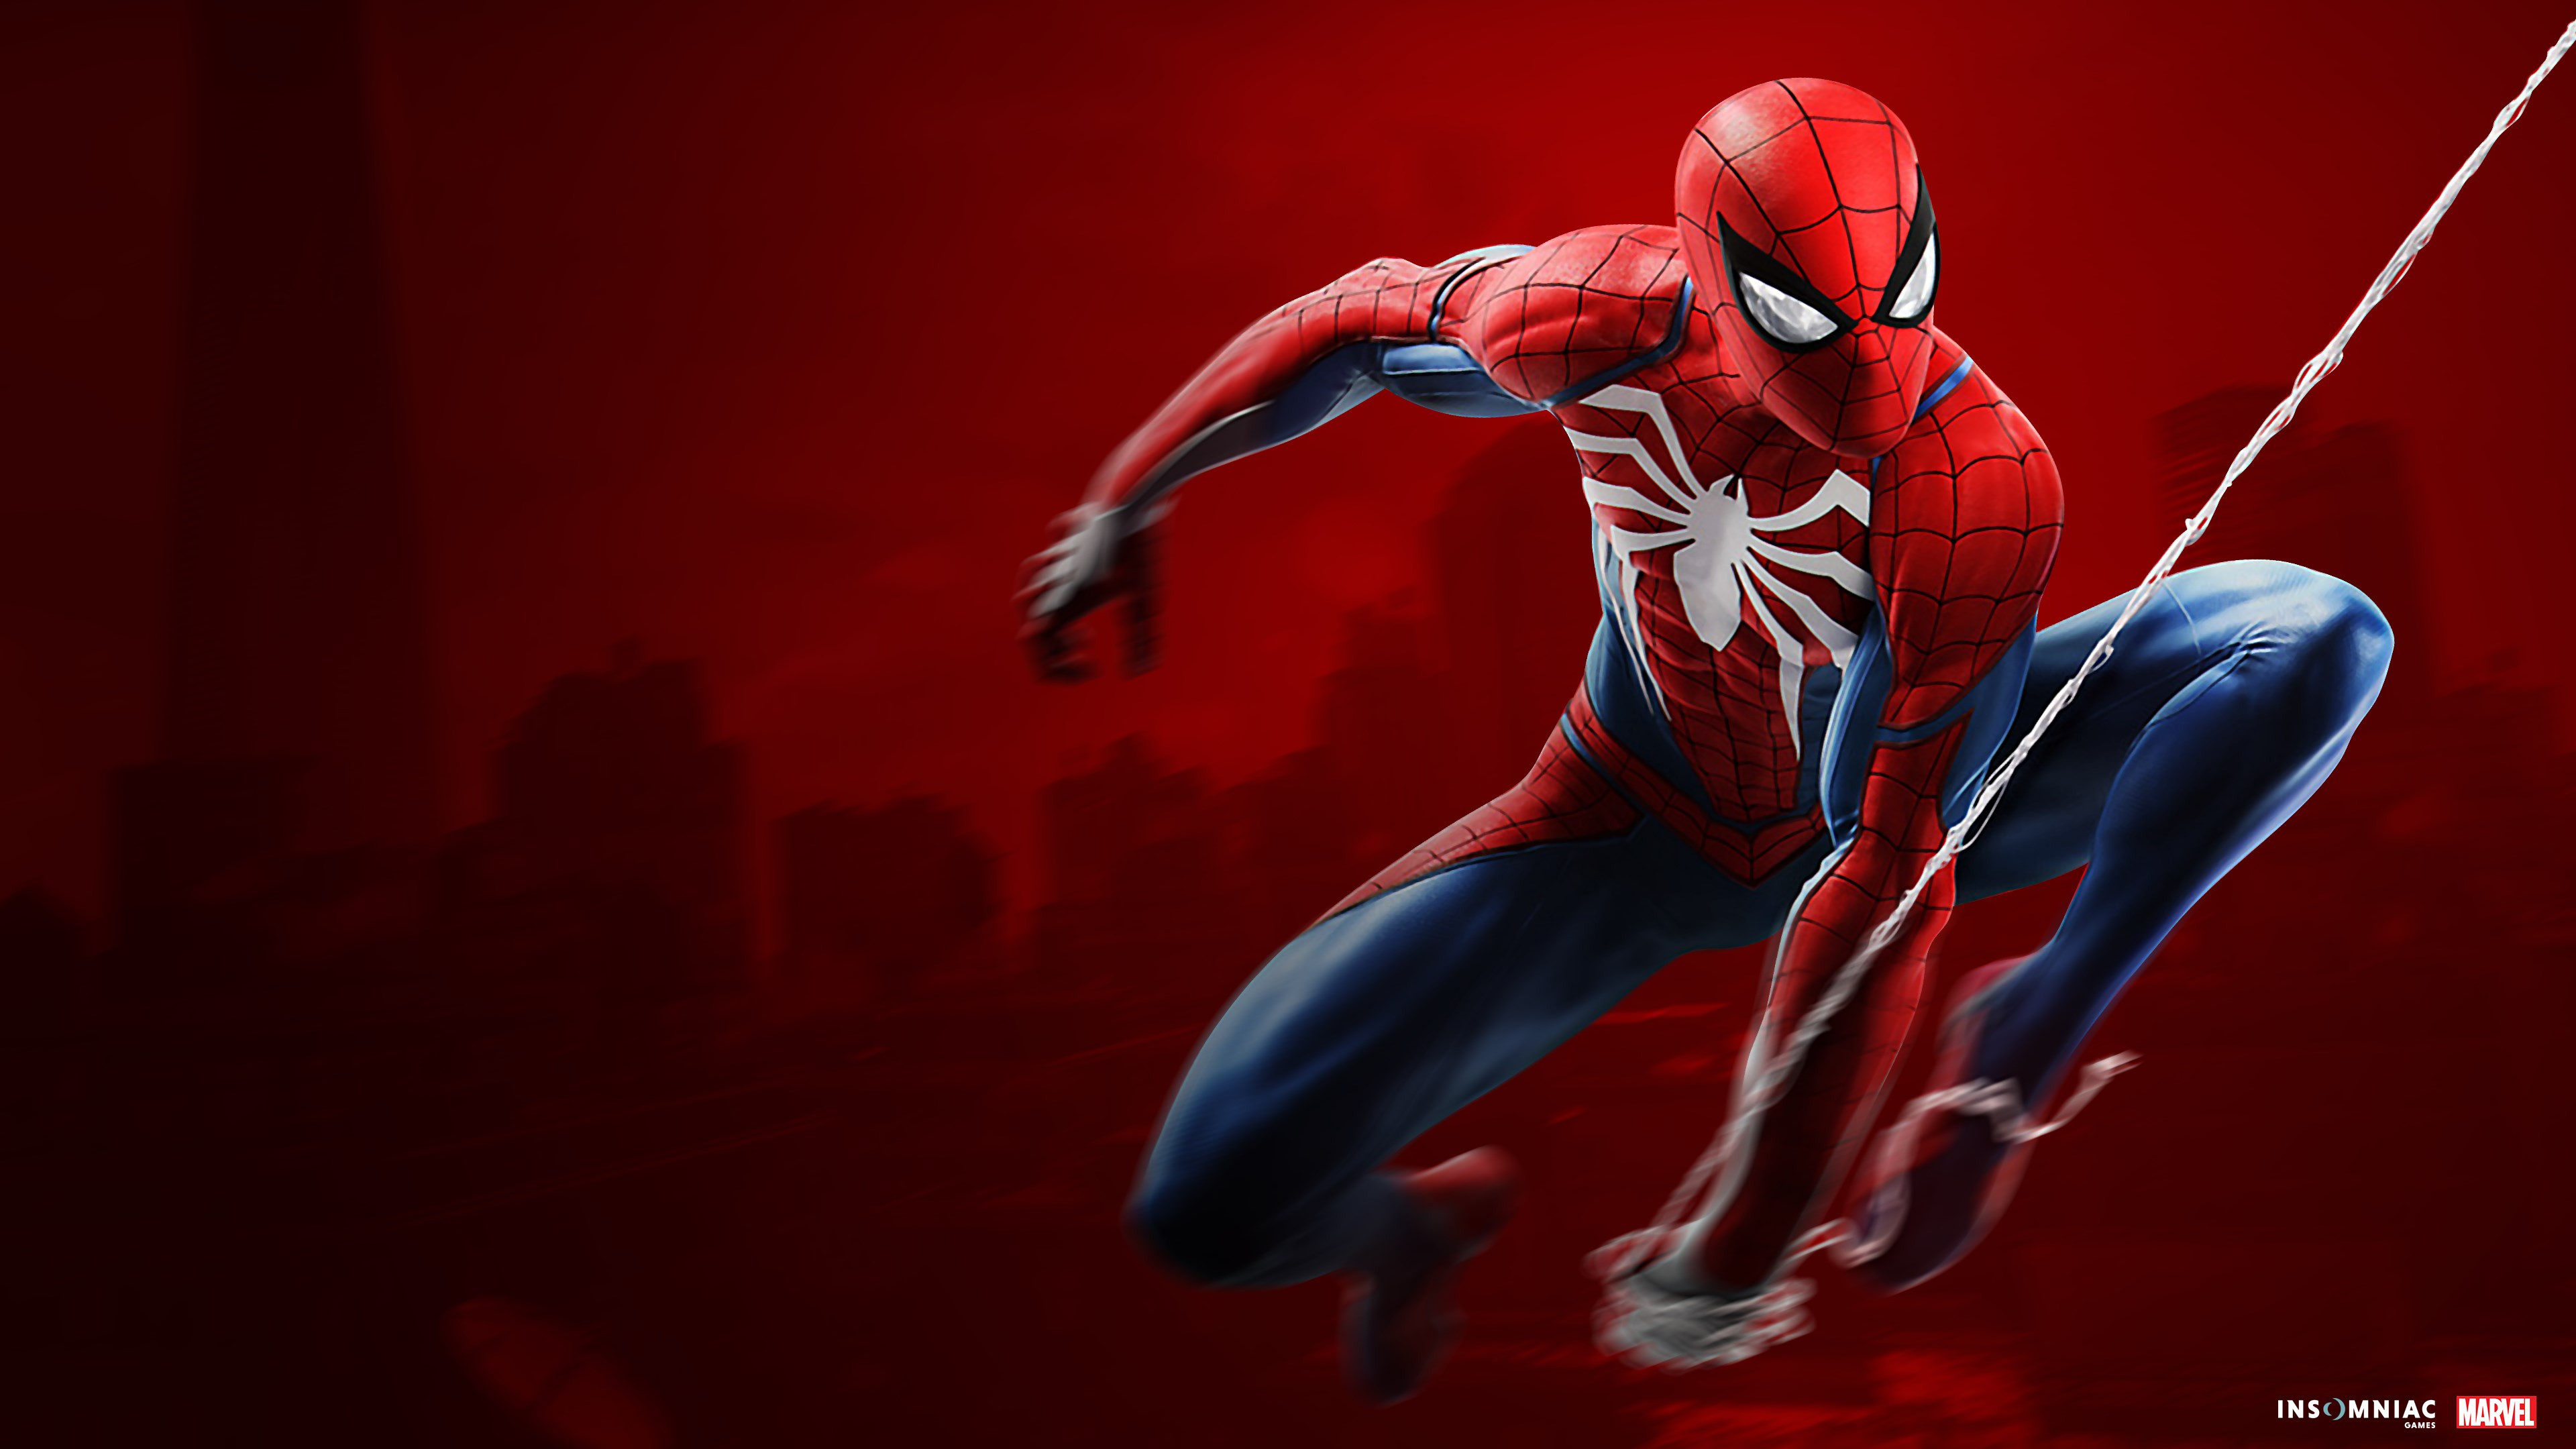 Spider Man game on PS4 wallpaper 3840x2160